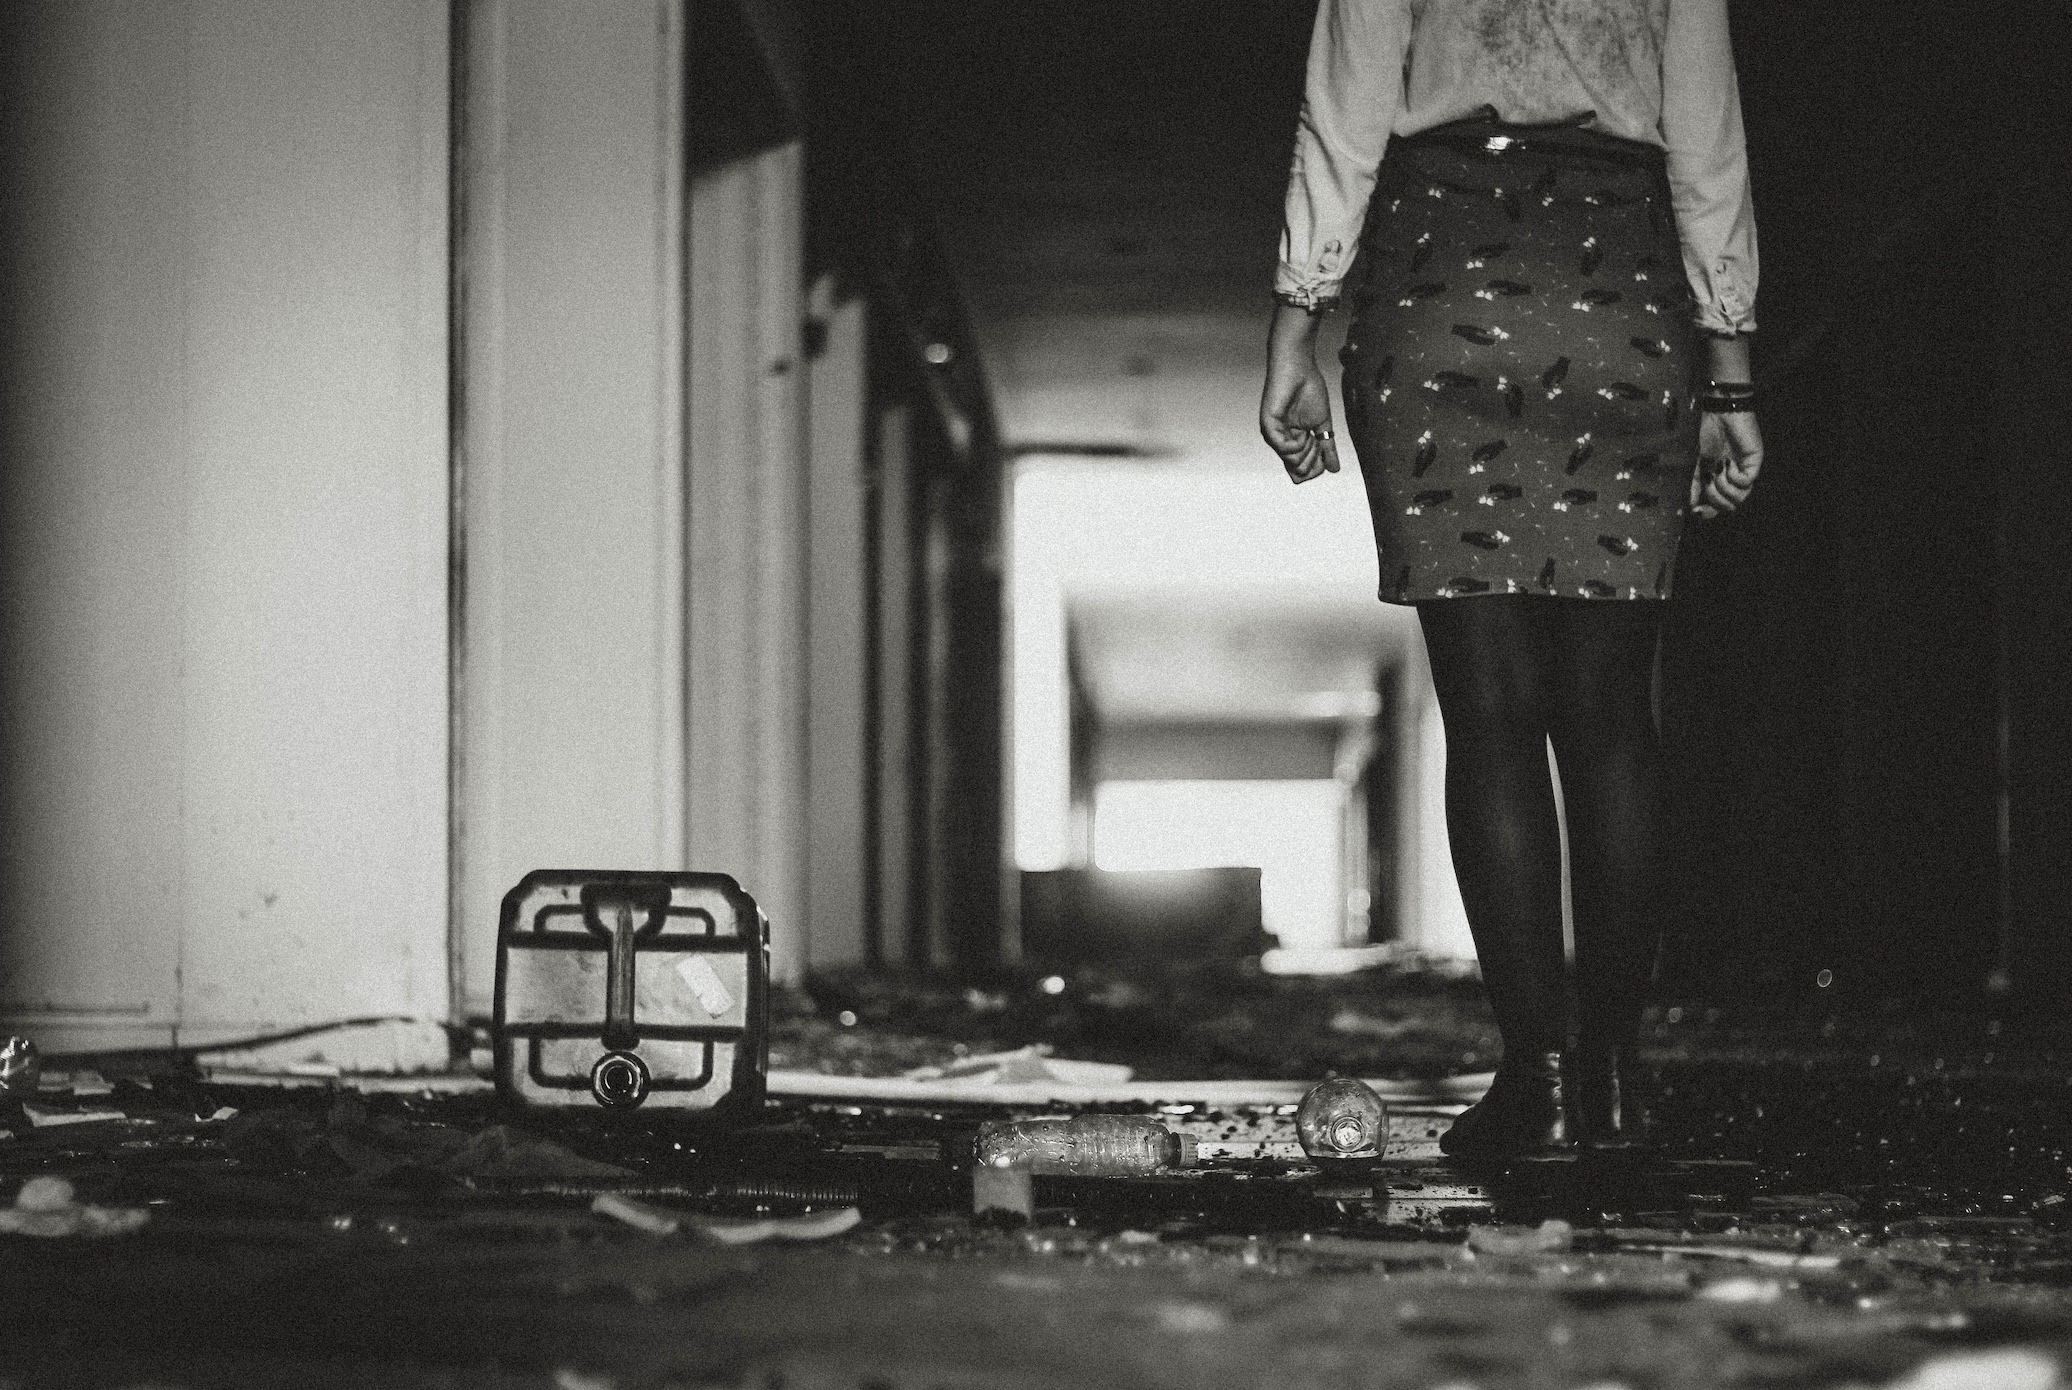 Black and white photo of woman in skirt standing in water damaged building; image by Allef Vinicius, via Unsplash.com.